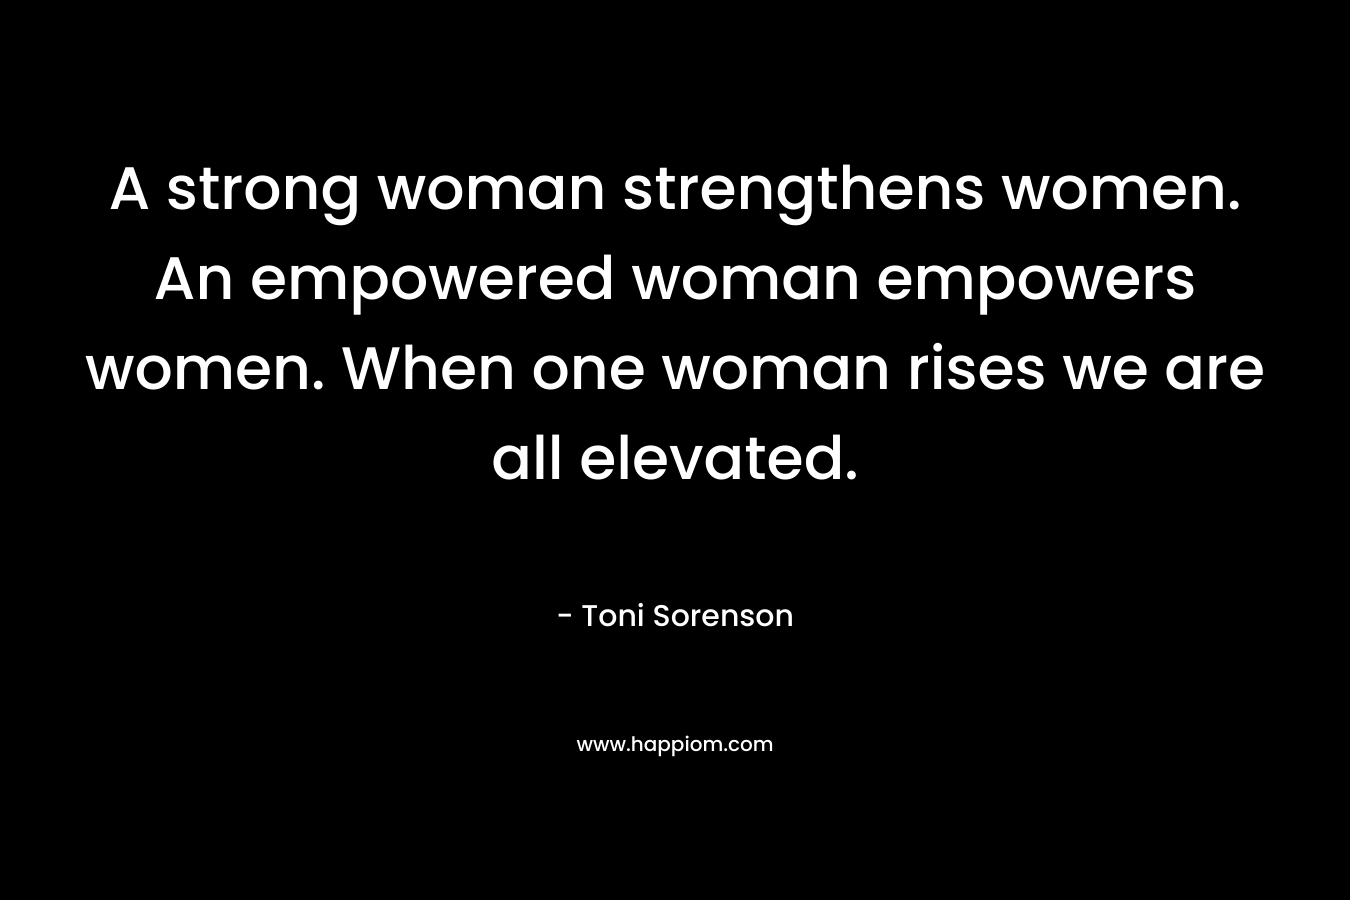 A strong woman strengthens women. An empowered woman empowers women. When one woman rises we are all elevated.